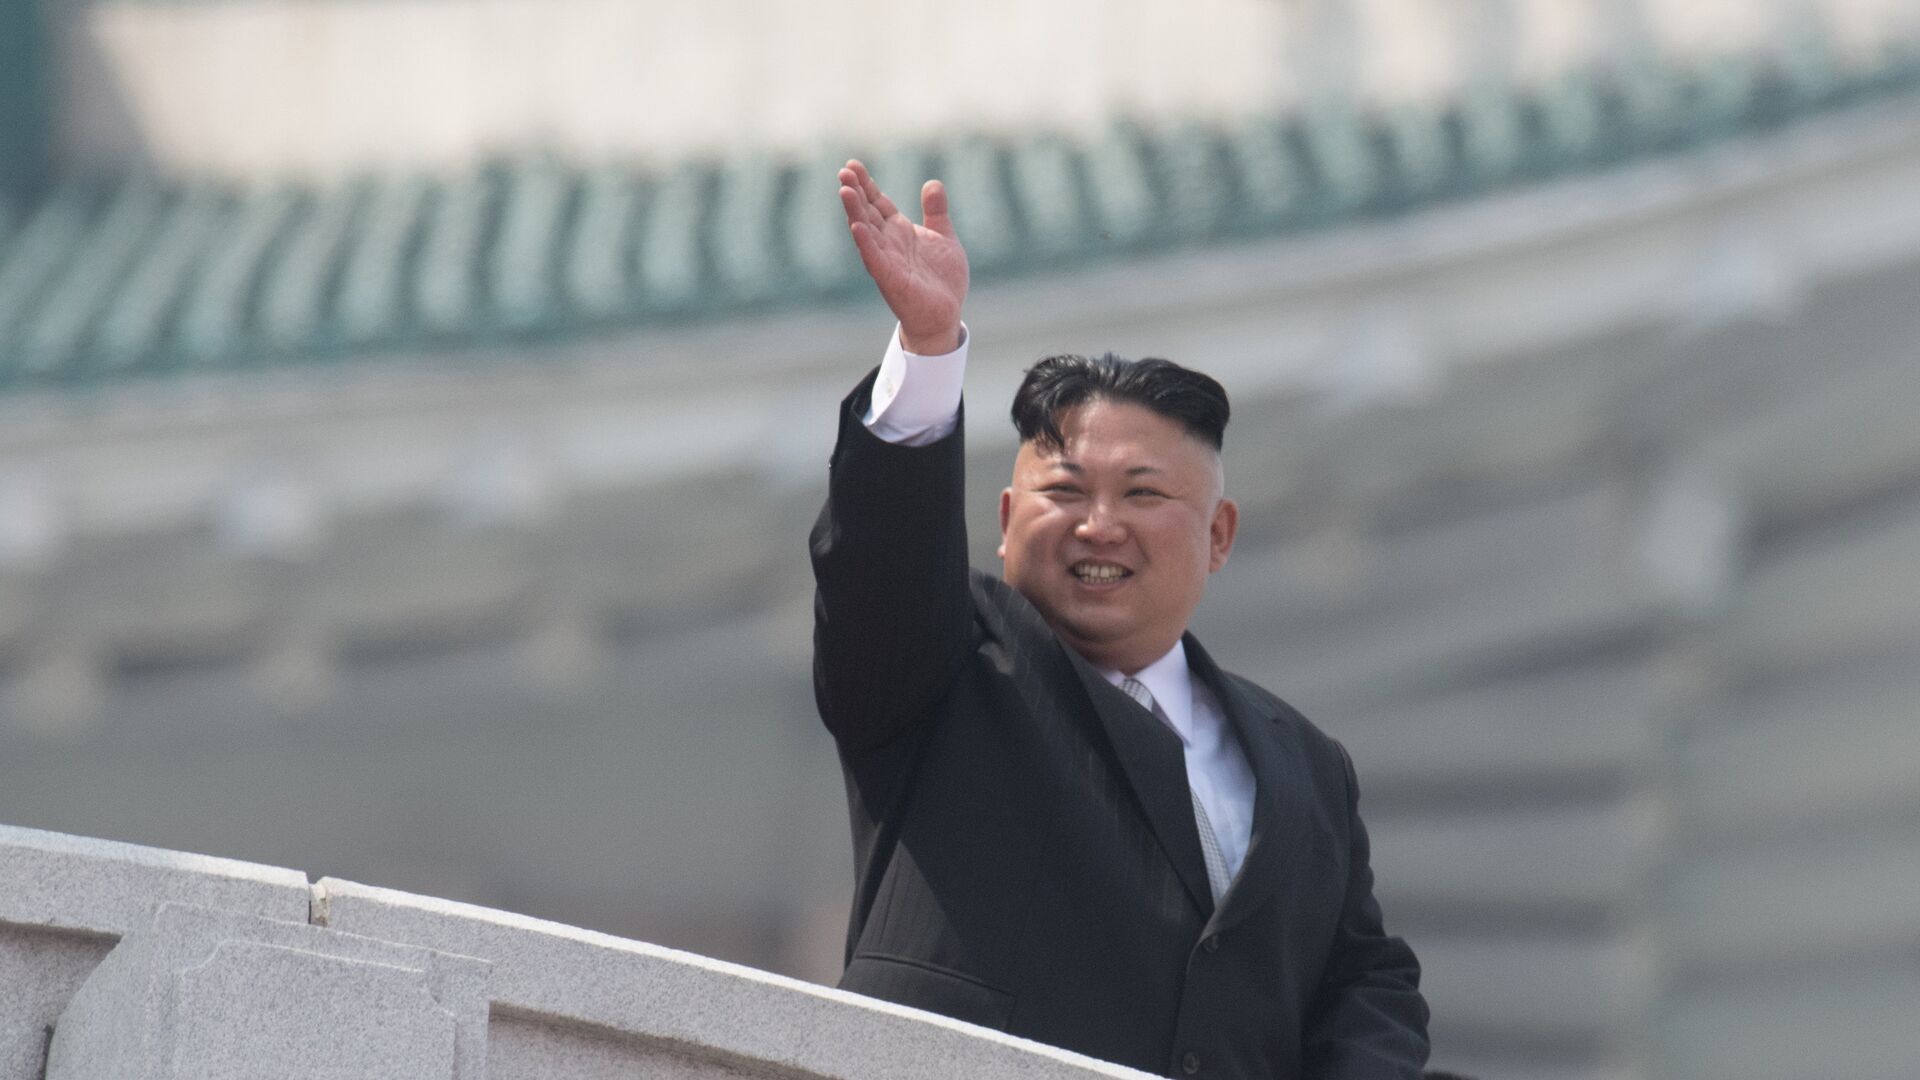 North Korean leader Kim Jong-un during a military parade marking the 105th birthday of Kim Il-Sung, the founder of North Korea, in Pyongyang - Sputnik Afrique, 1920, 13.03.2023